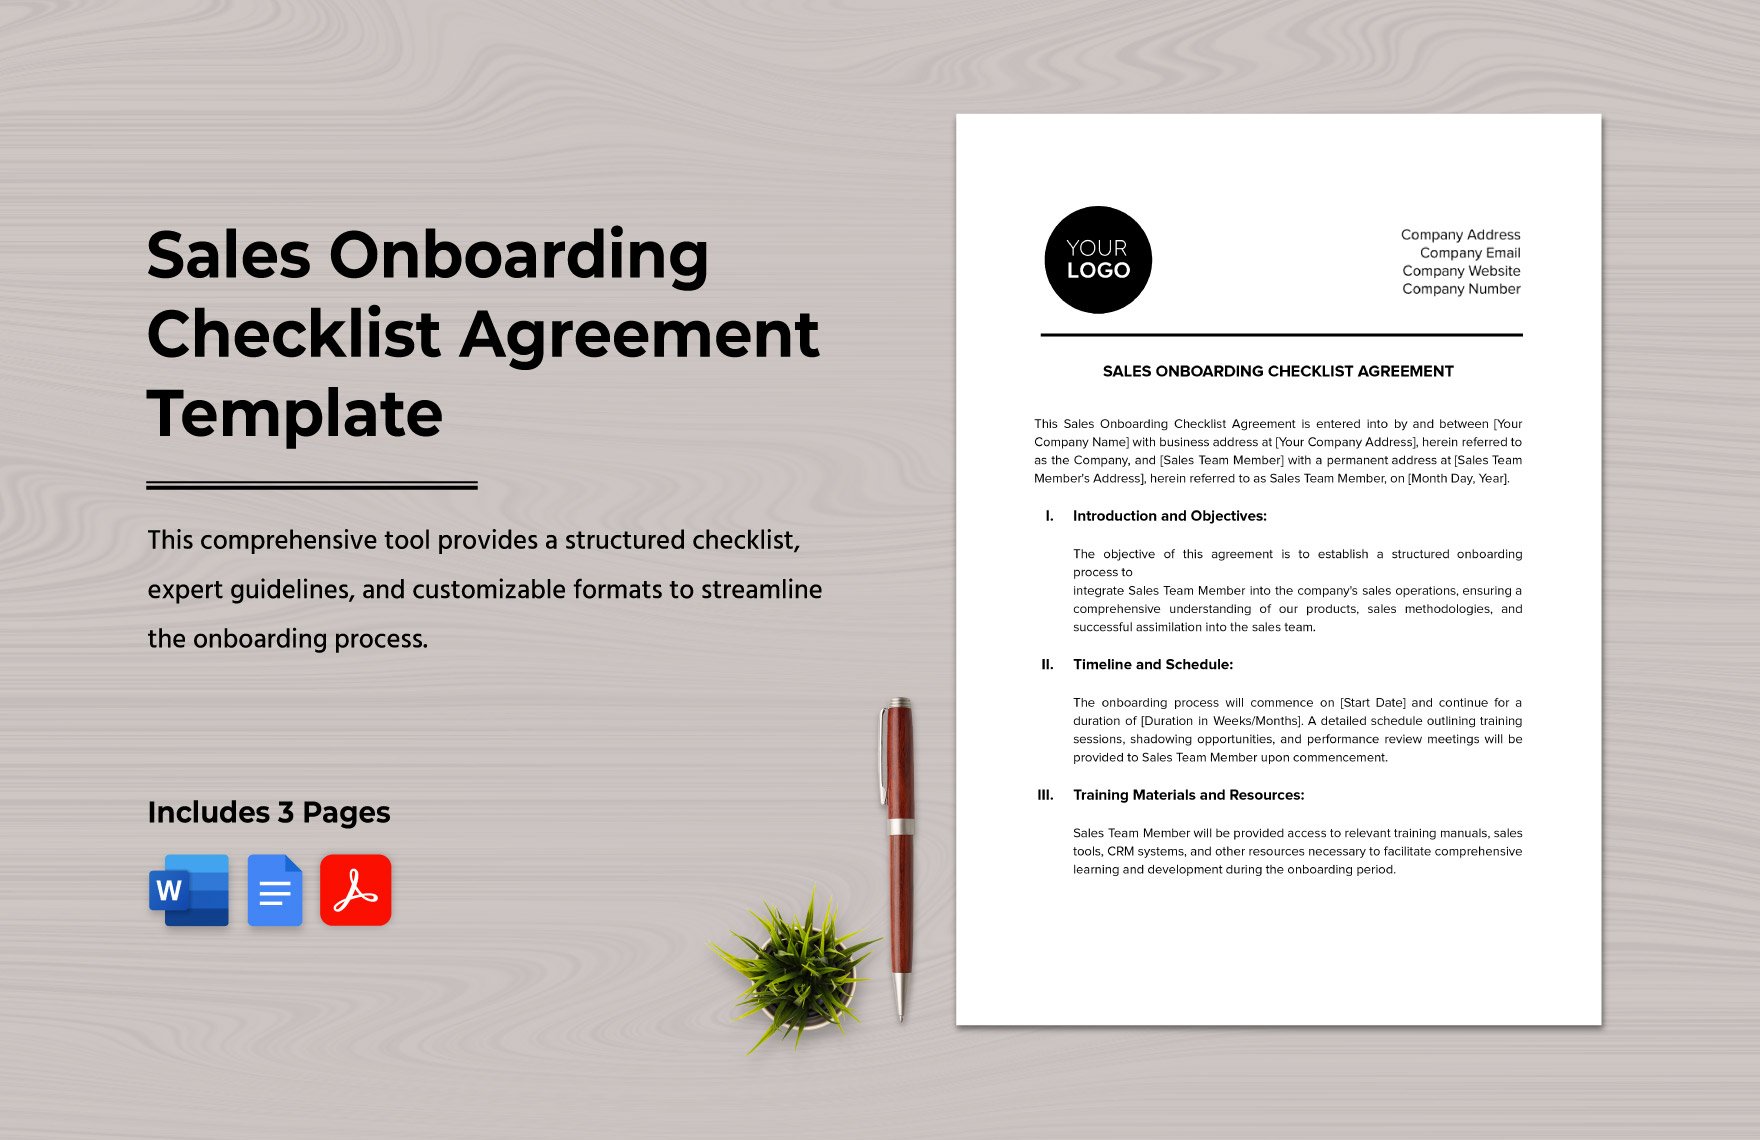 Sales Onboarding Checklist Agreement Template in Word, Google Docs, PDF